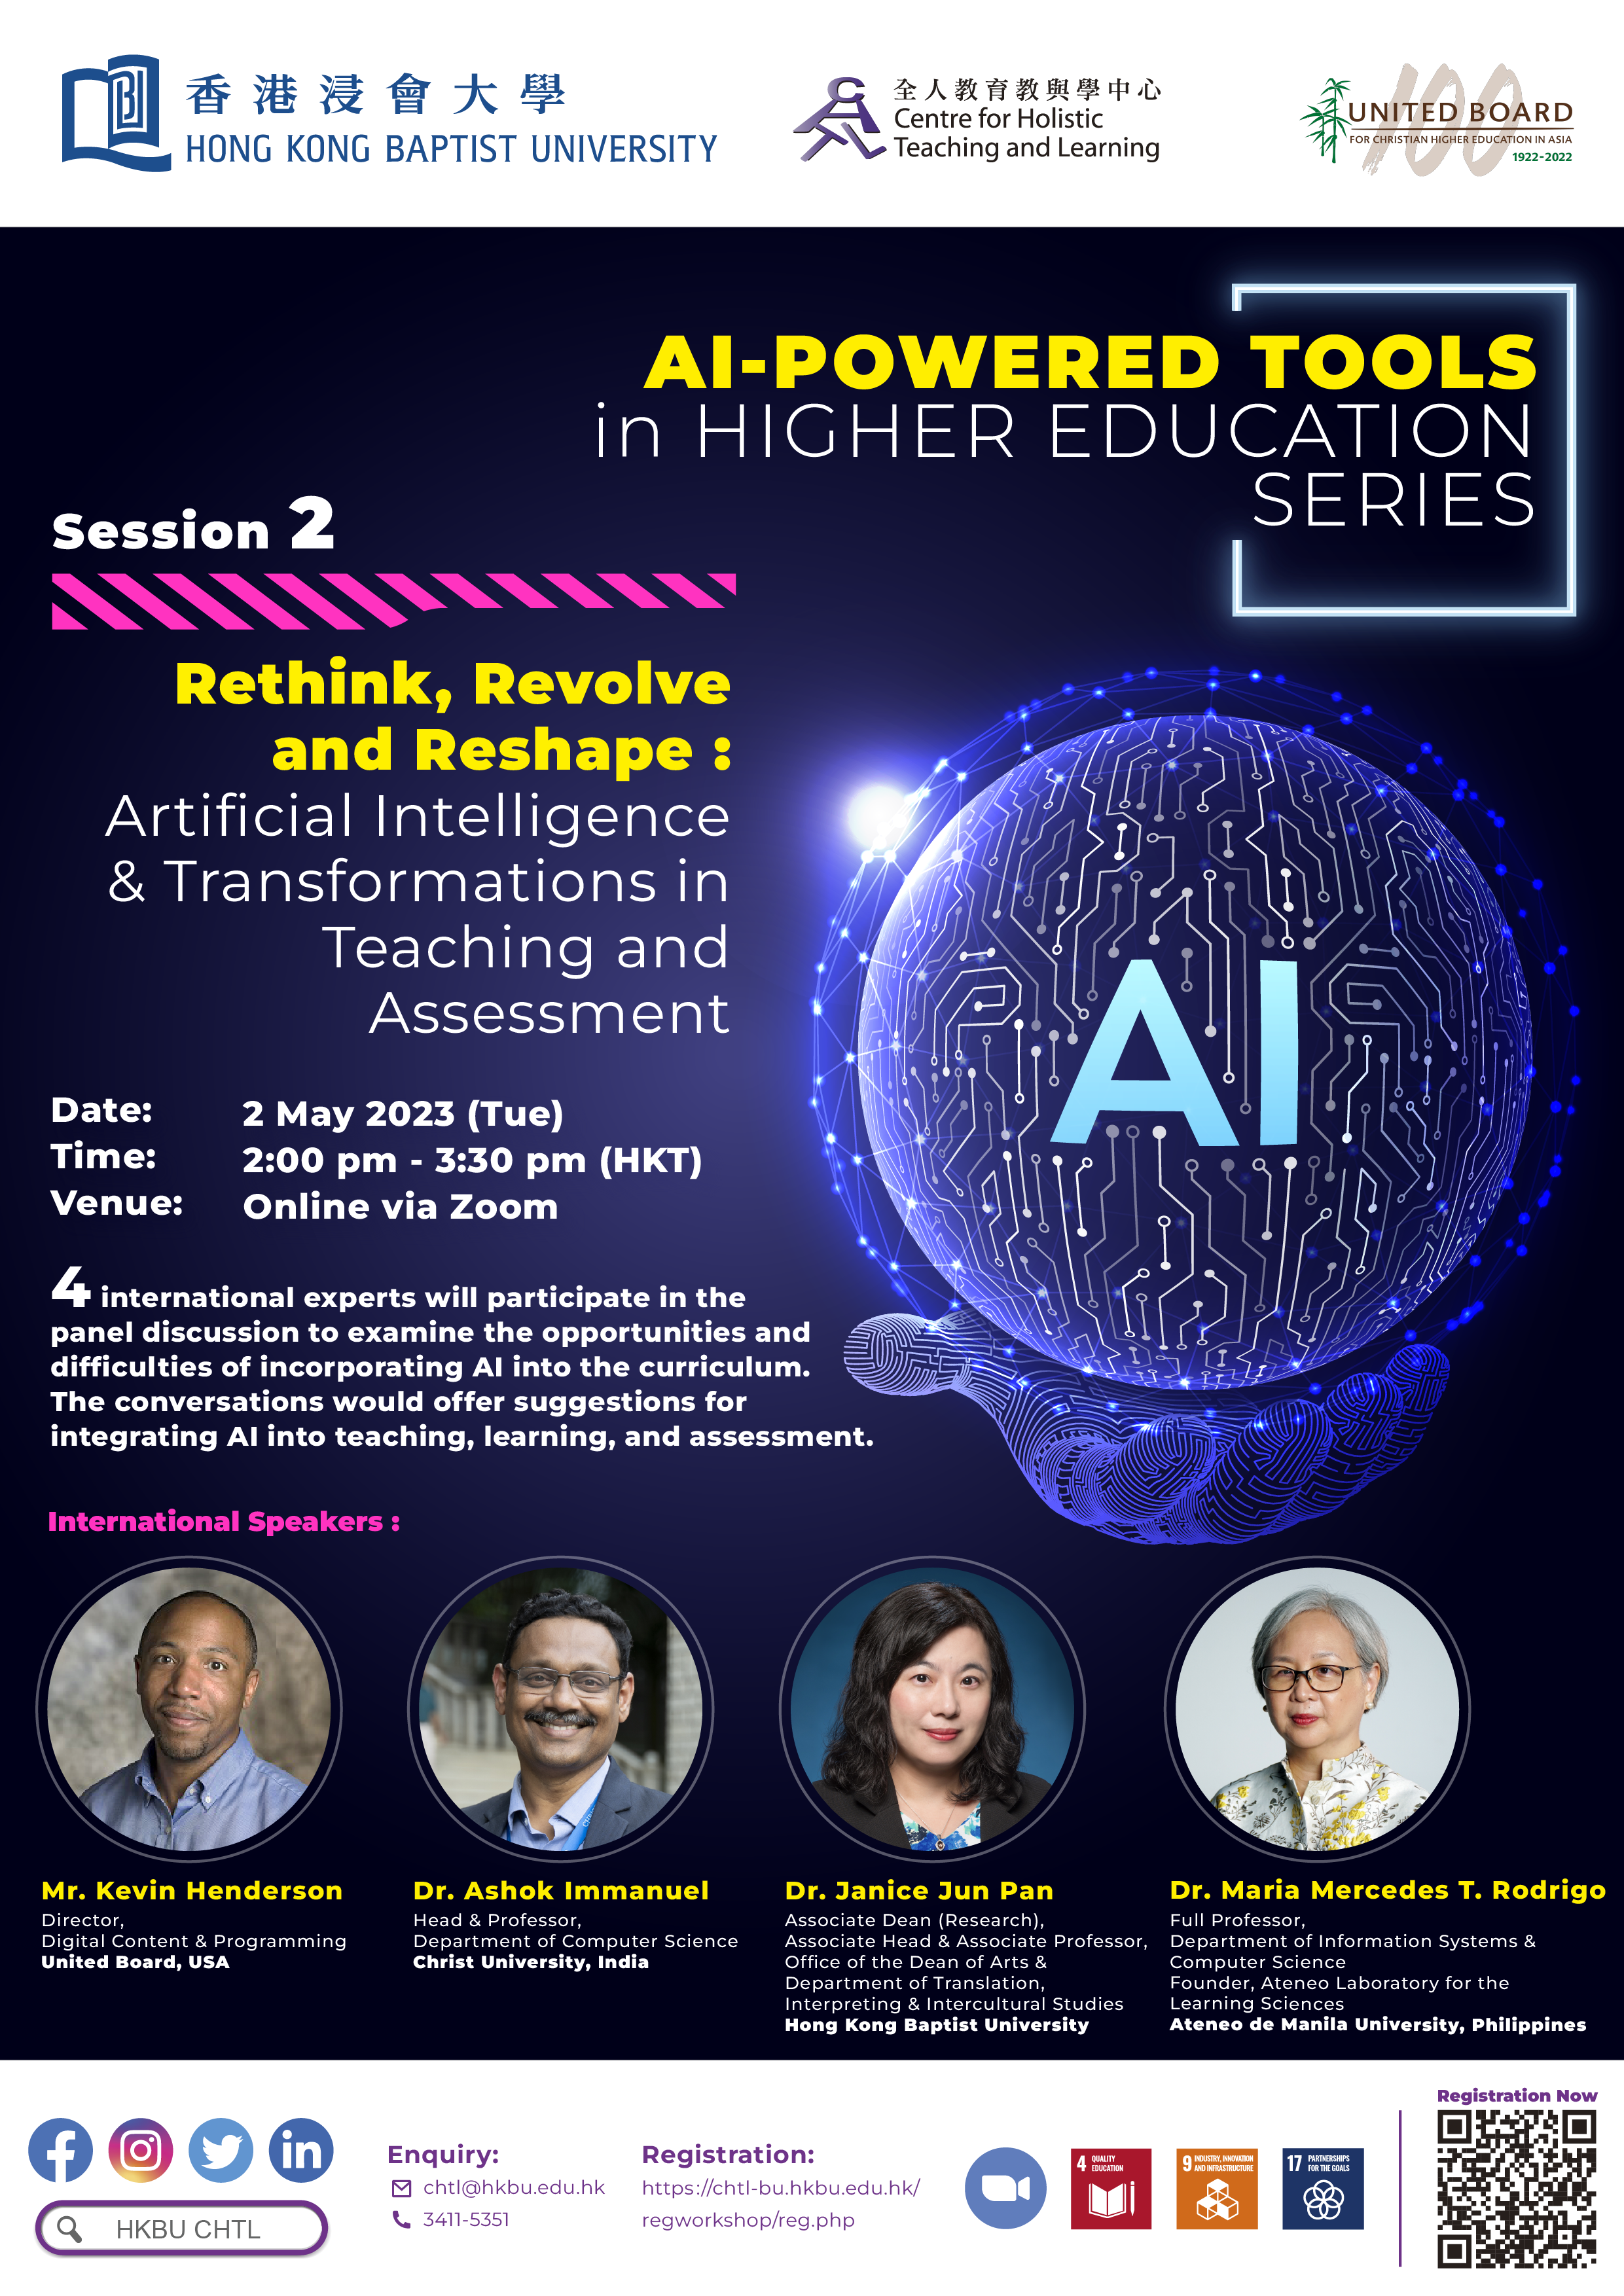 Rethink, Revolve and Reshape: Artificial Intelligence & Transformations in Teaching and Assessment